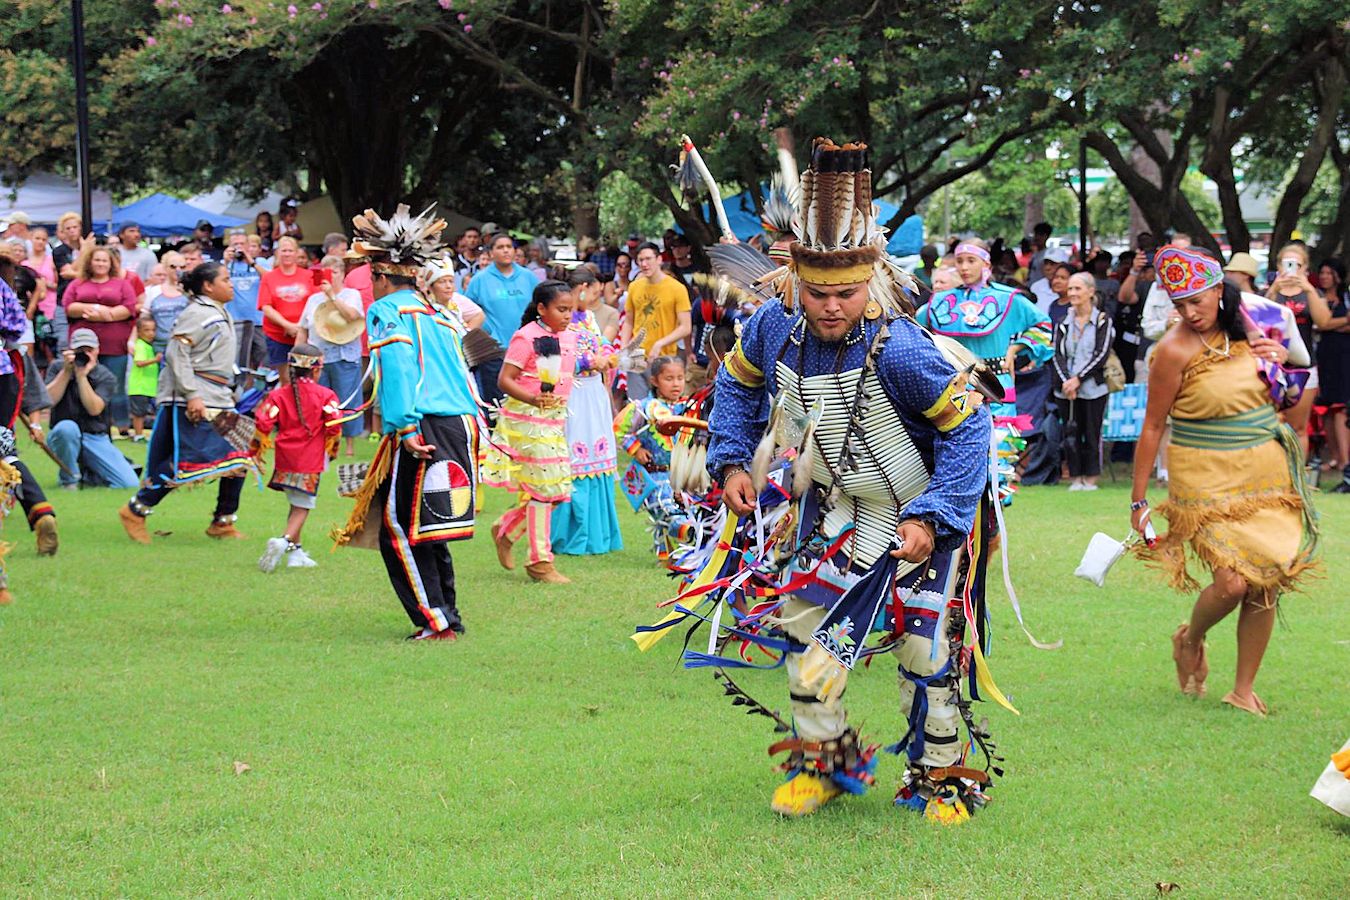 Native Lumbee men and women dance in traditional dressings during a performance at the Lumbee POWWOW in Lumberton, North Carolina. 